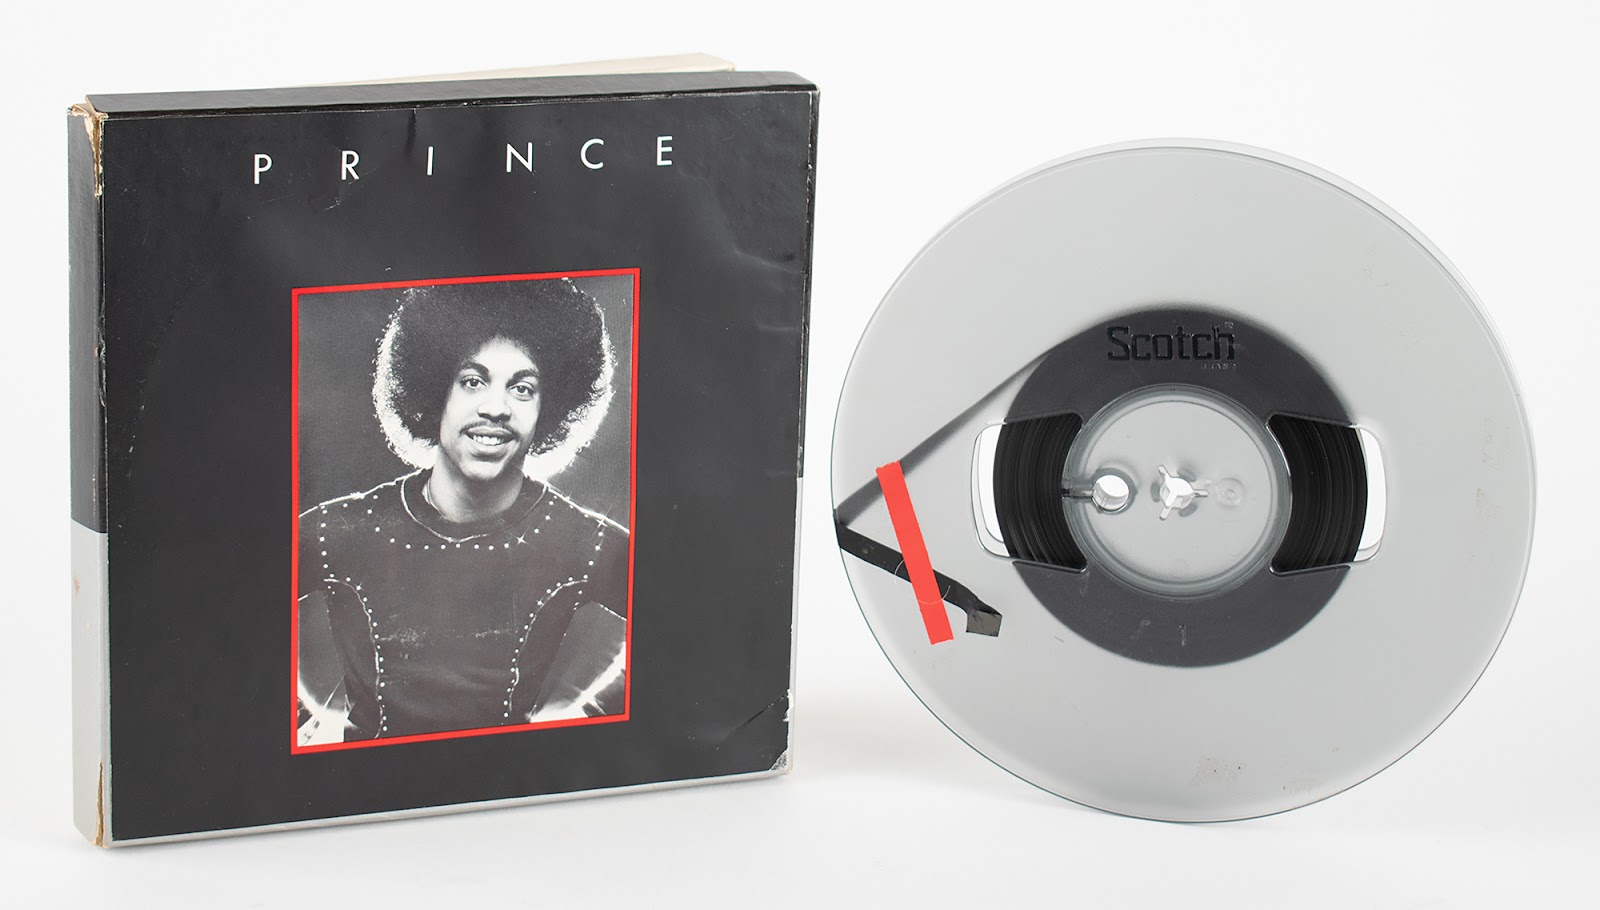 Prince’s 1976 demo tape that landed him his first contract at Warner Bros. Studios.